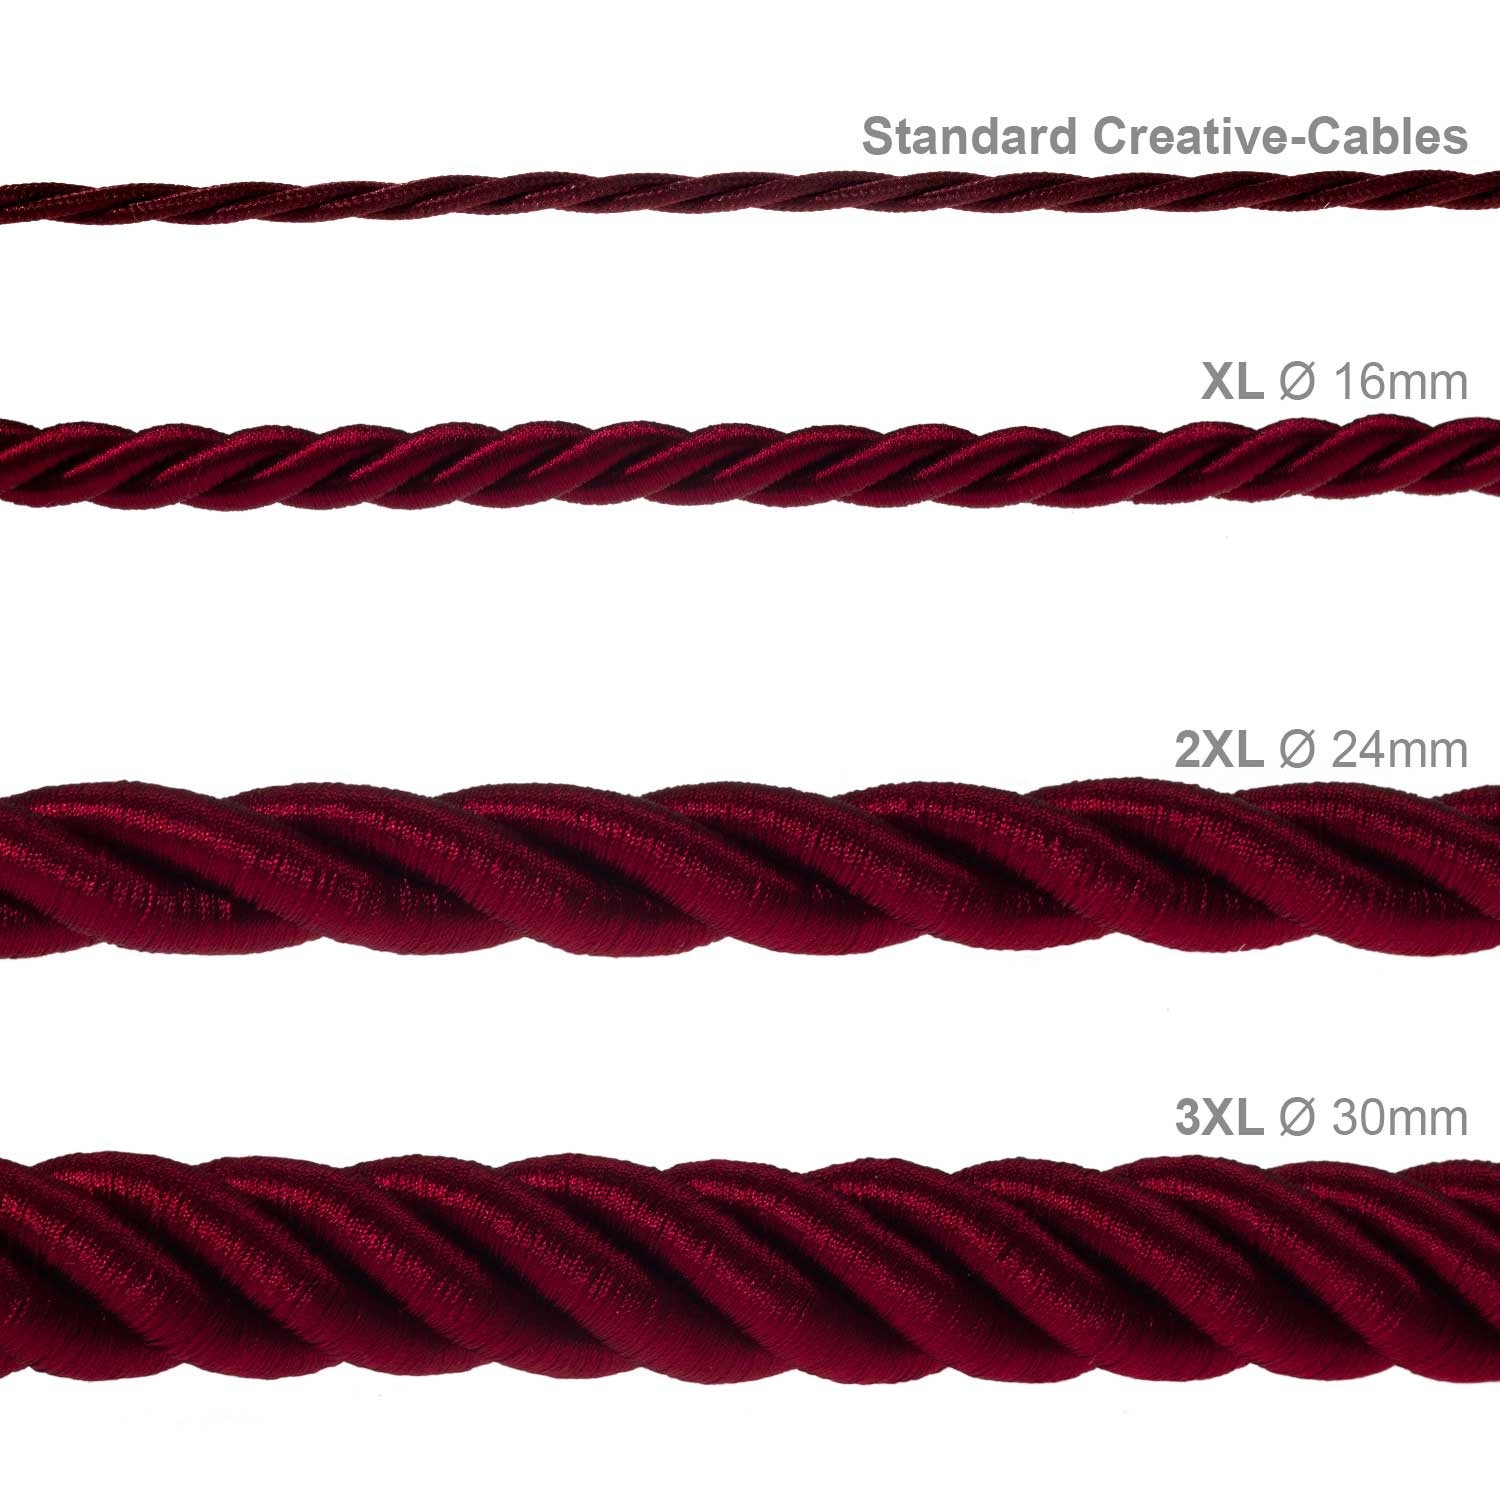 3XL Rope electrical wire 18/3 AWG wire inside. Shiny Dark Bordeaux Fabric. 30mm.